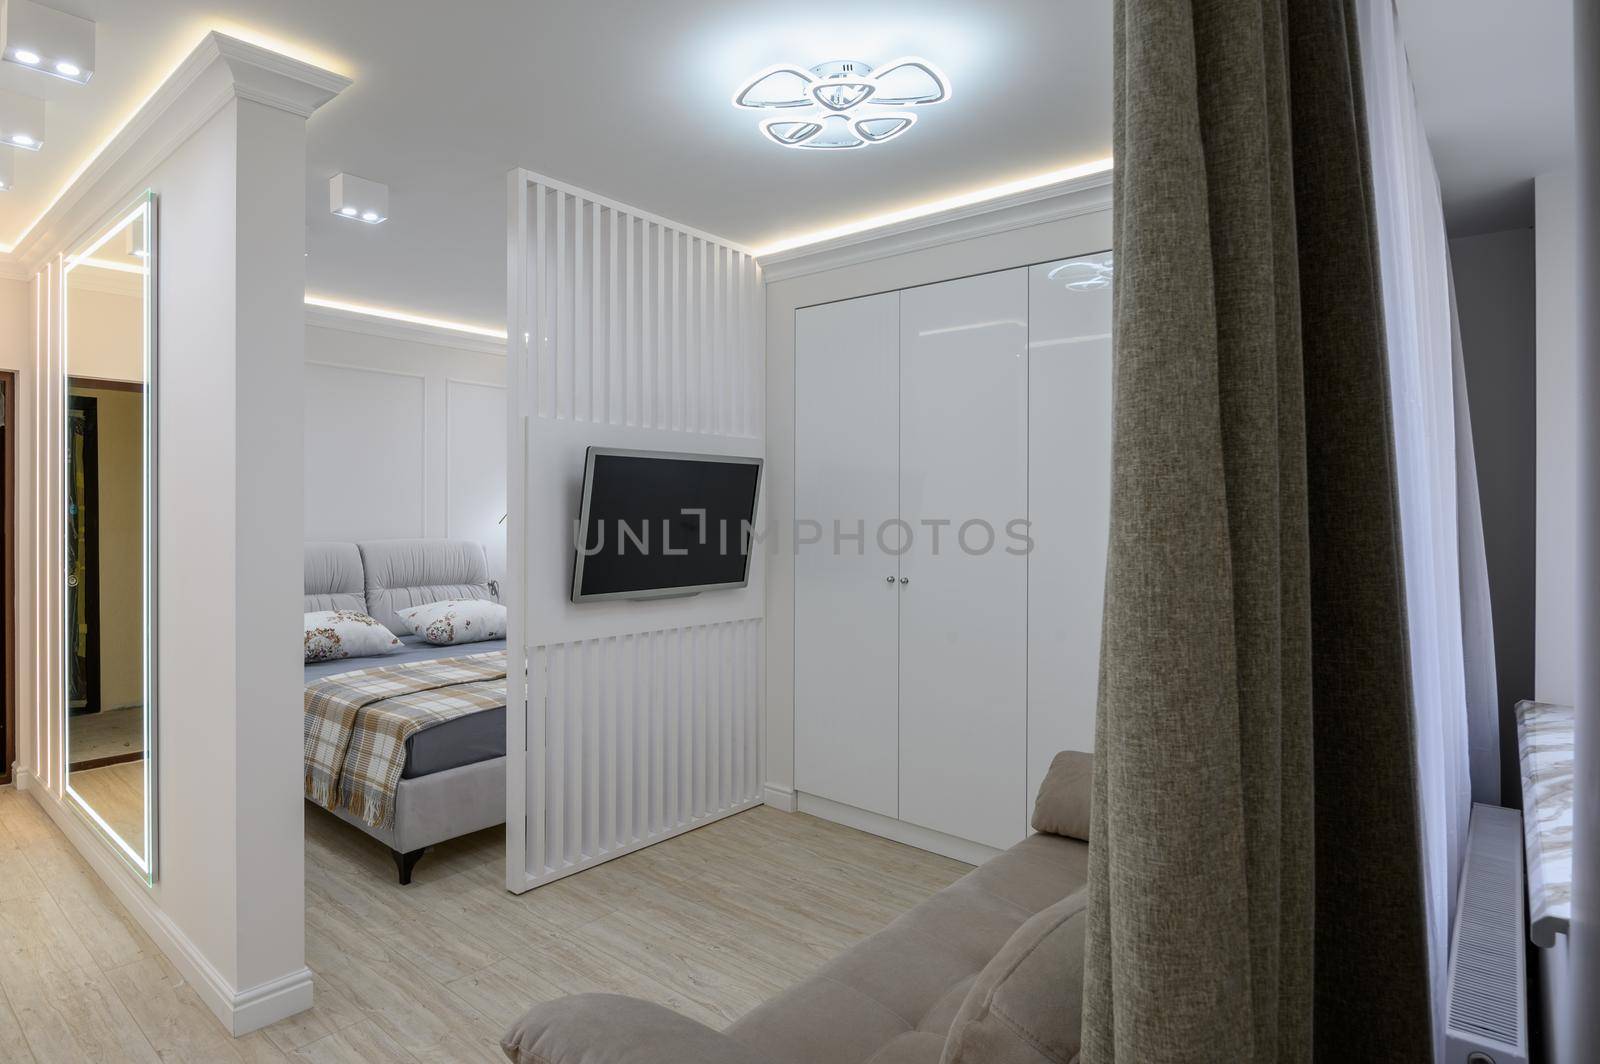 Studio flat interior with living room and bedroom, television and a closet in it's corner with a mirror